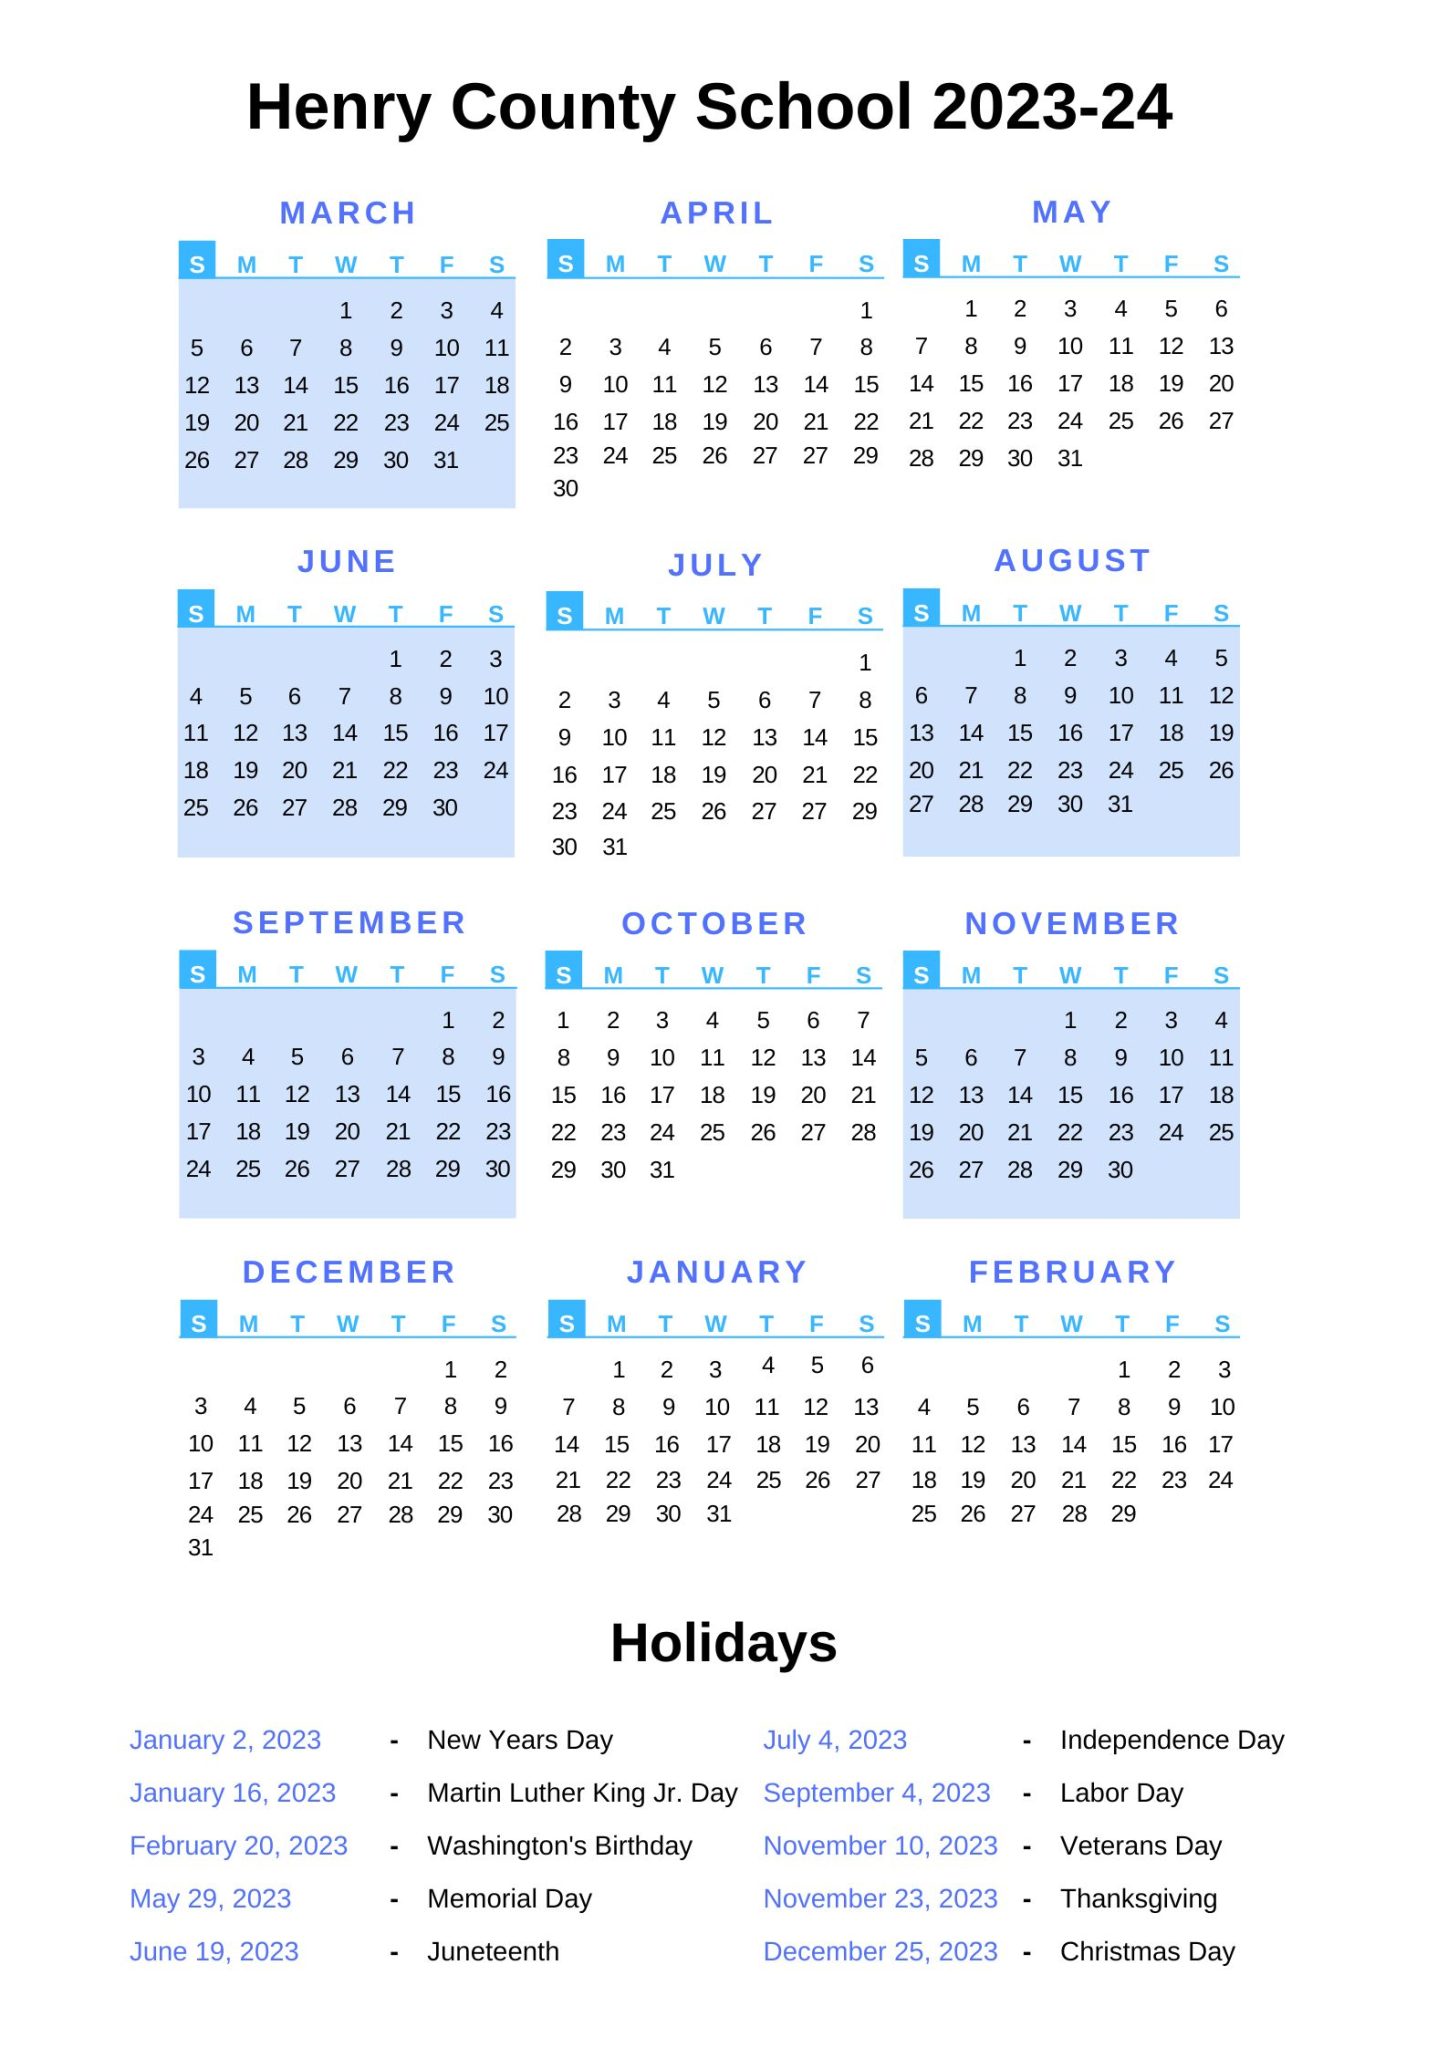 henry-county-schools-calendar-with-holidays-2022-2023